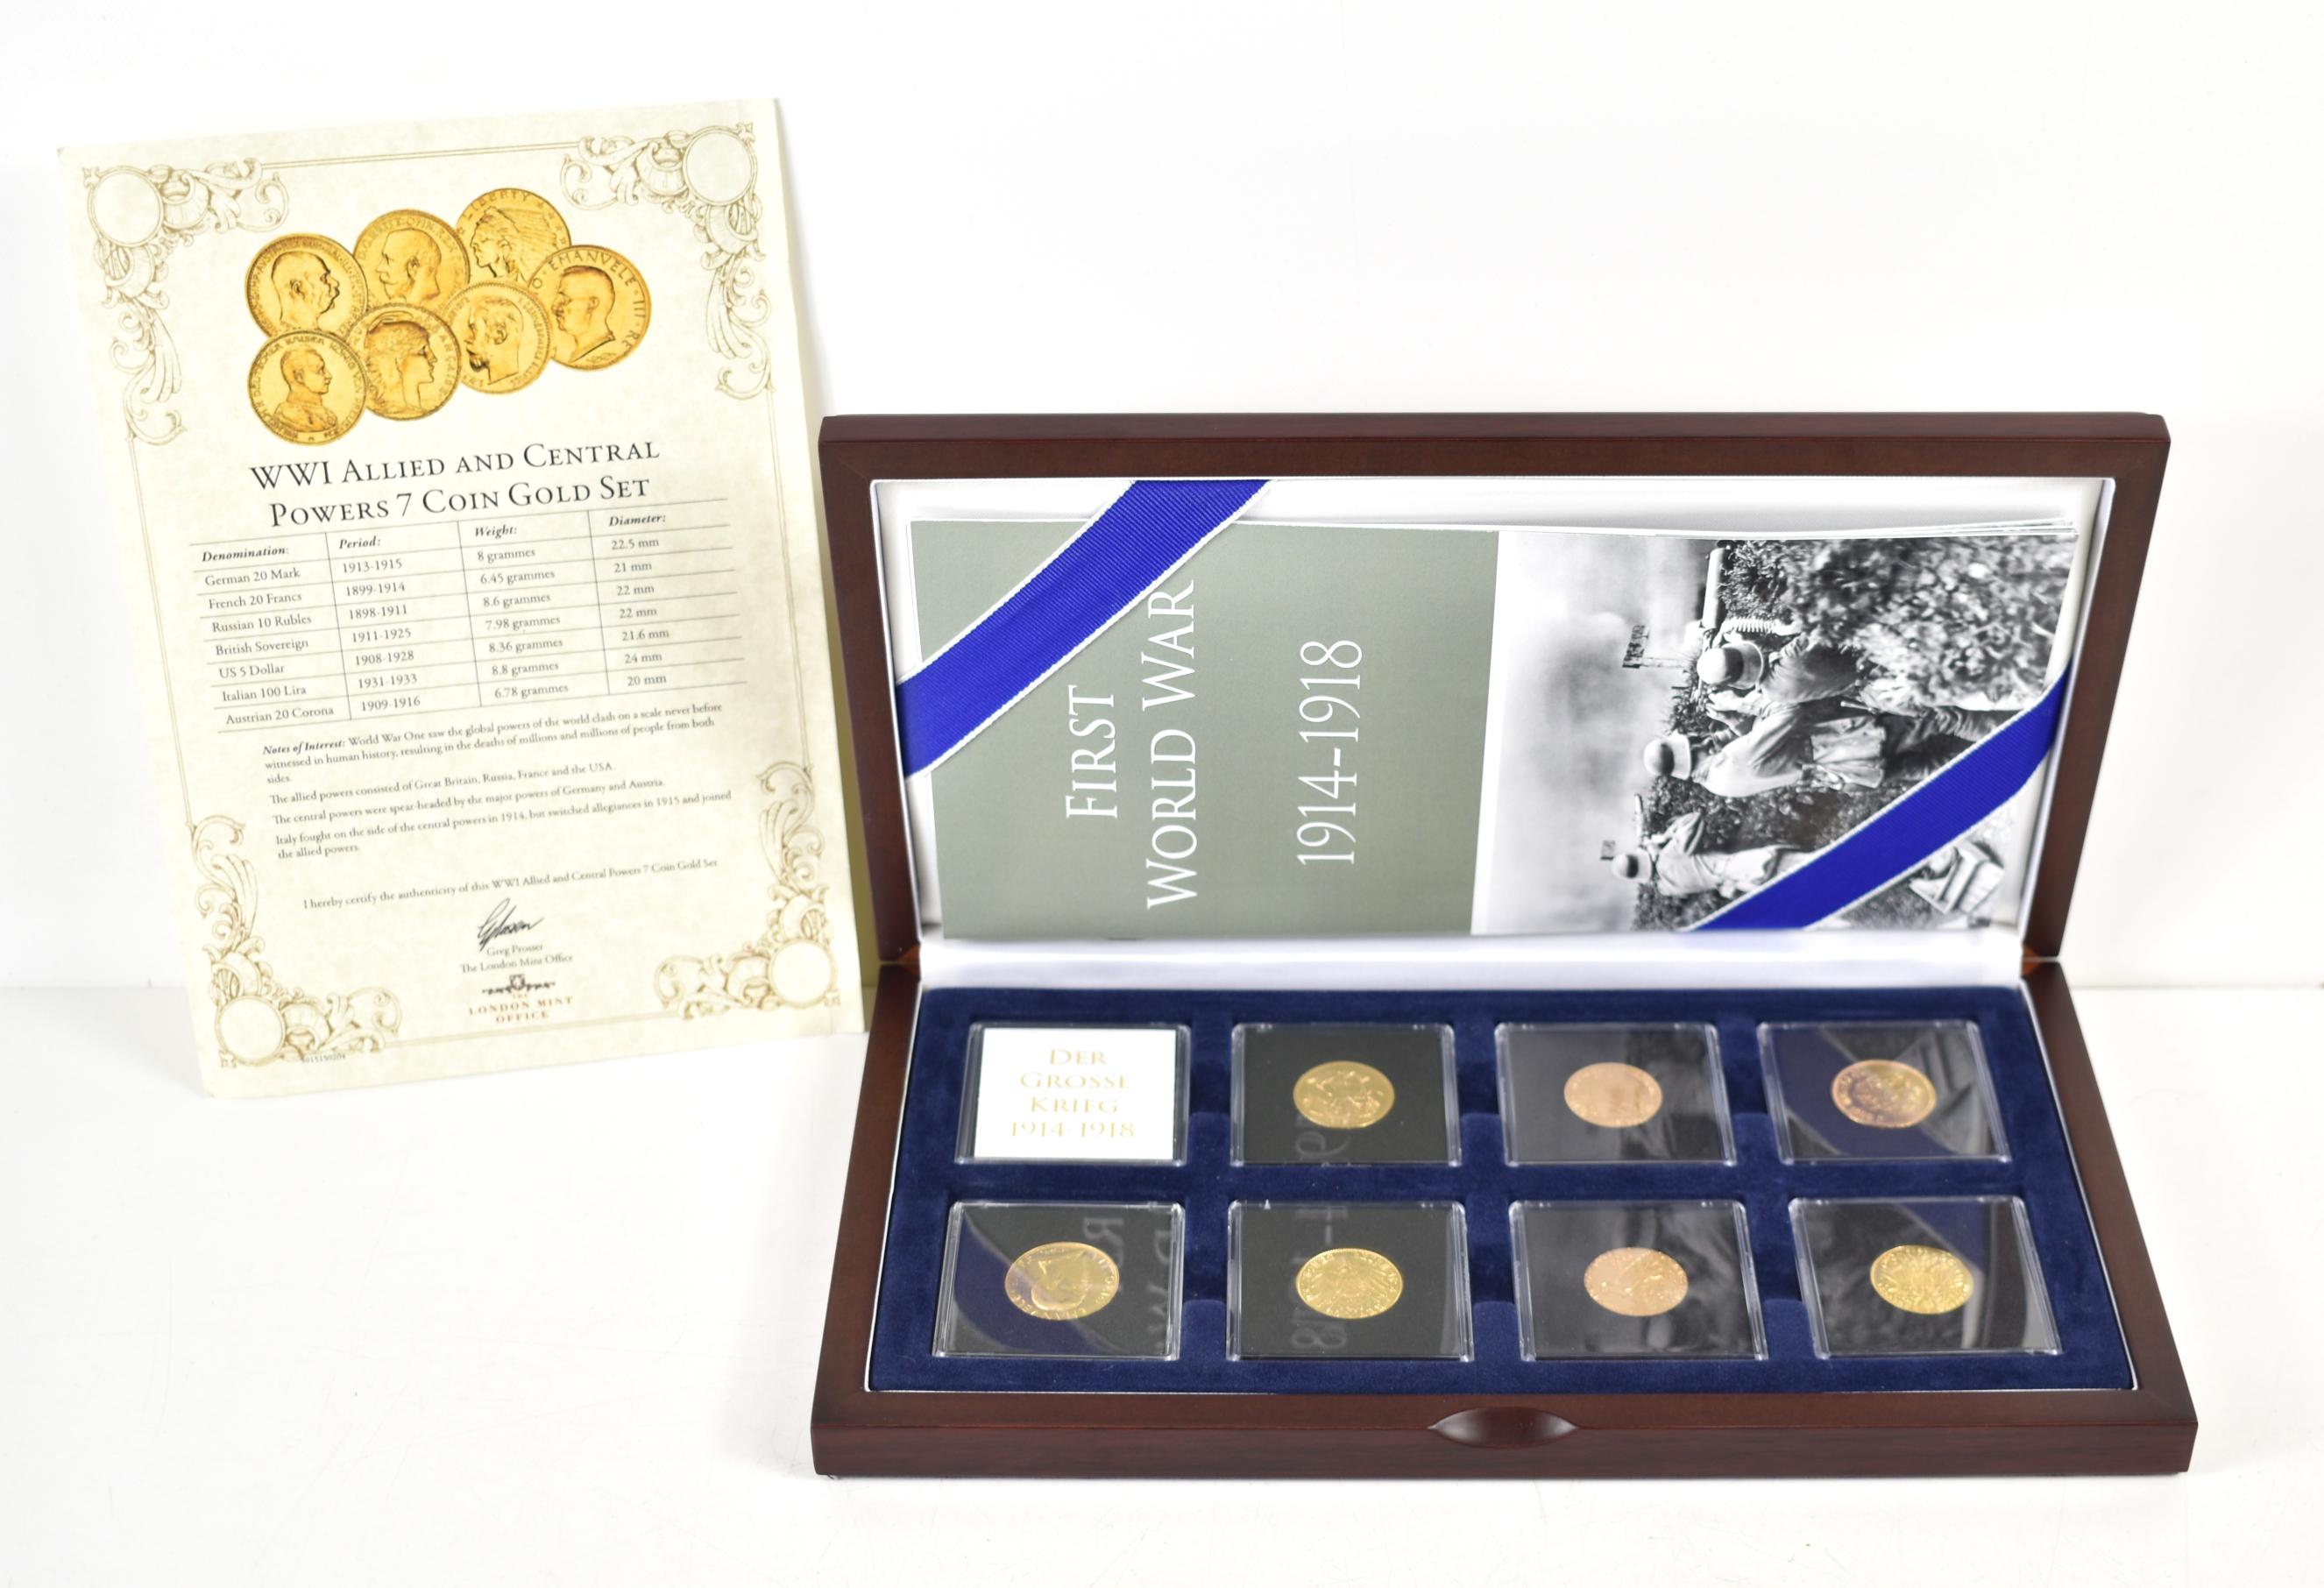 Numismatic: Gold & Silver Coins